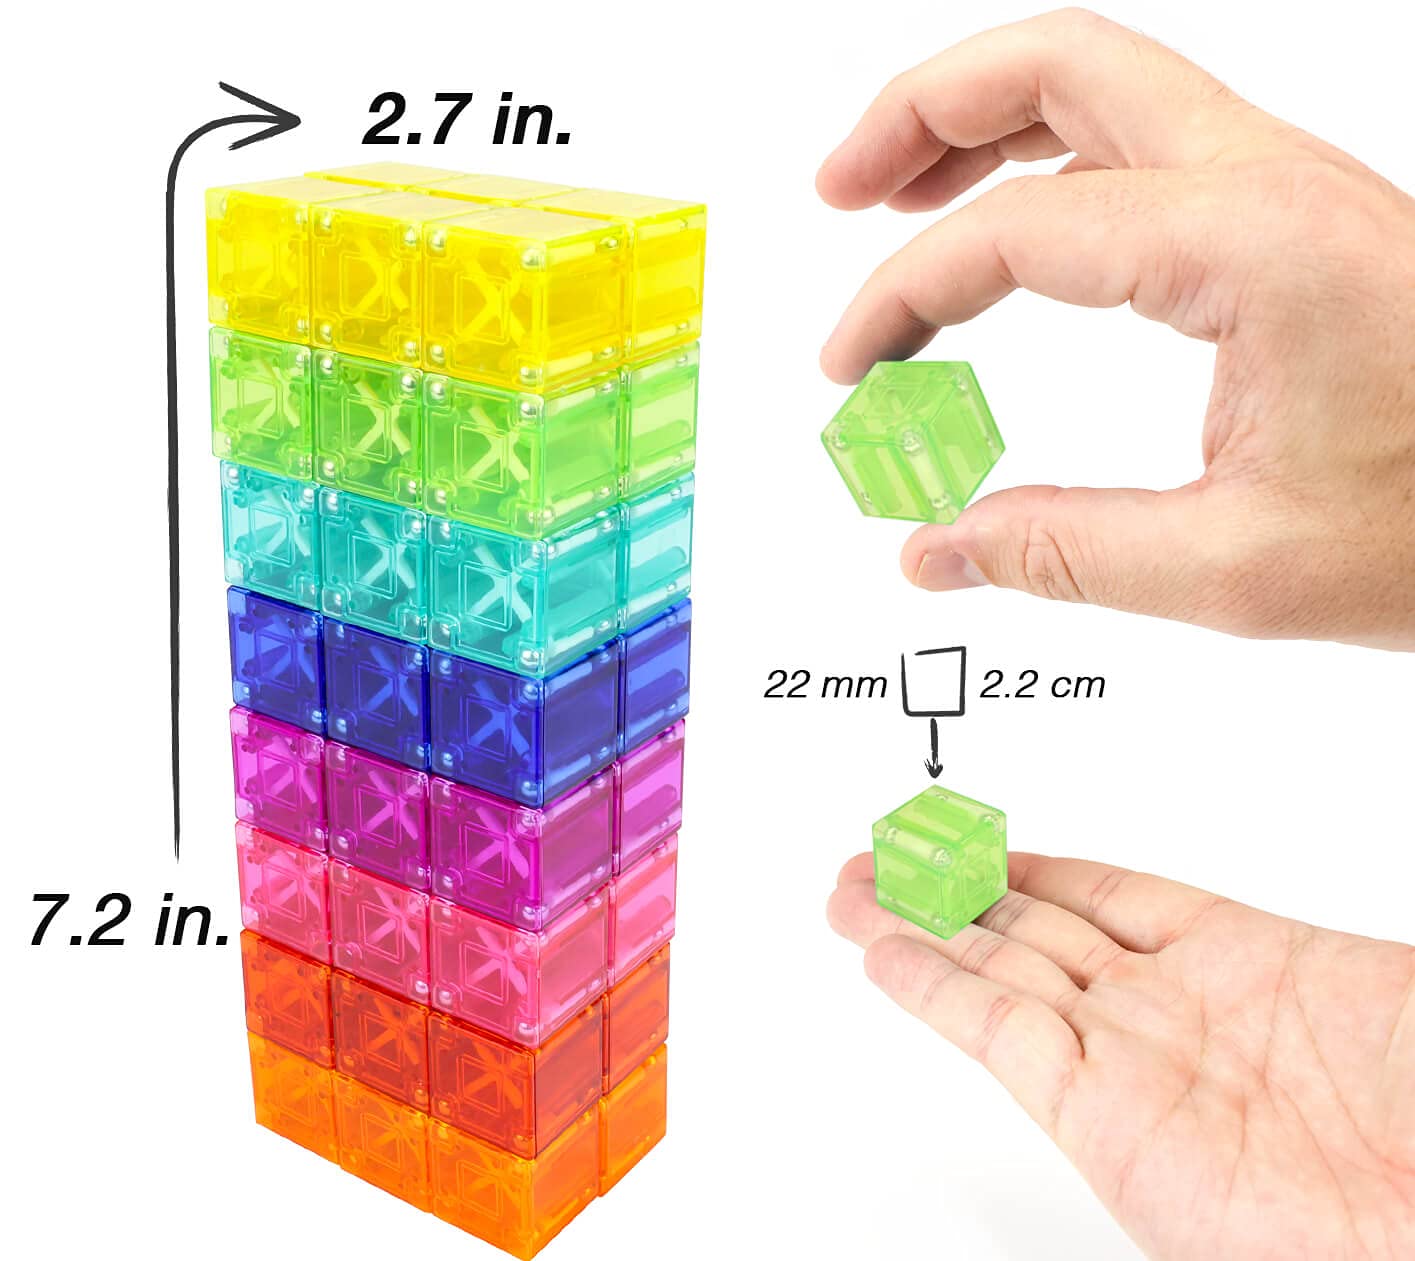 BrainSpark Translucent Digit Blocks 48 Pieces Magnetic Building Blocks, Montessori Clear Magnet Cubes for Boys and Girls Stacking Sets